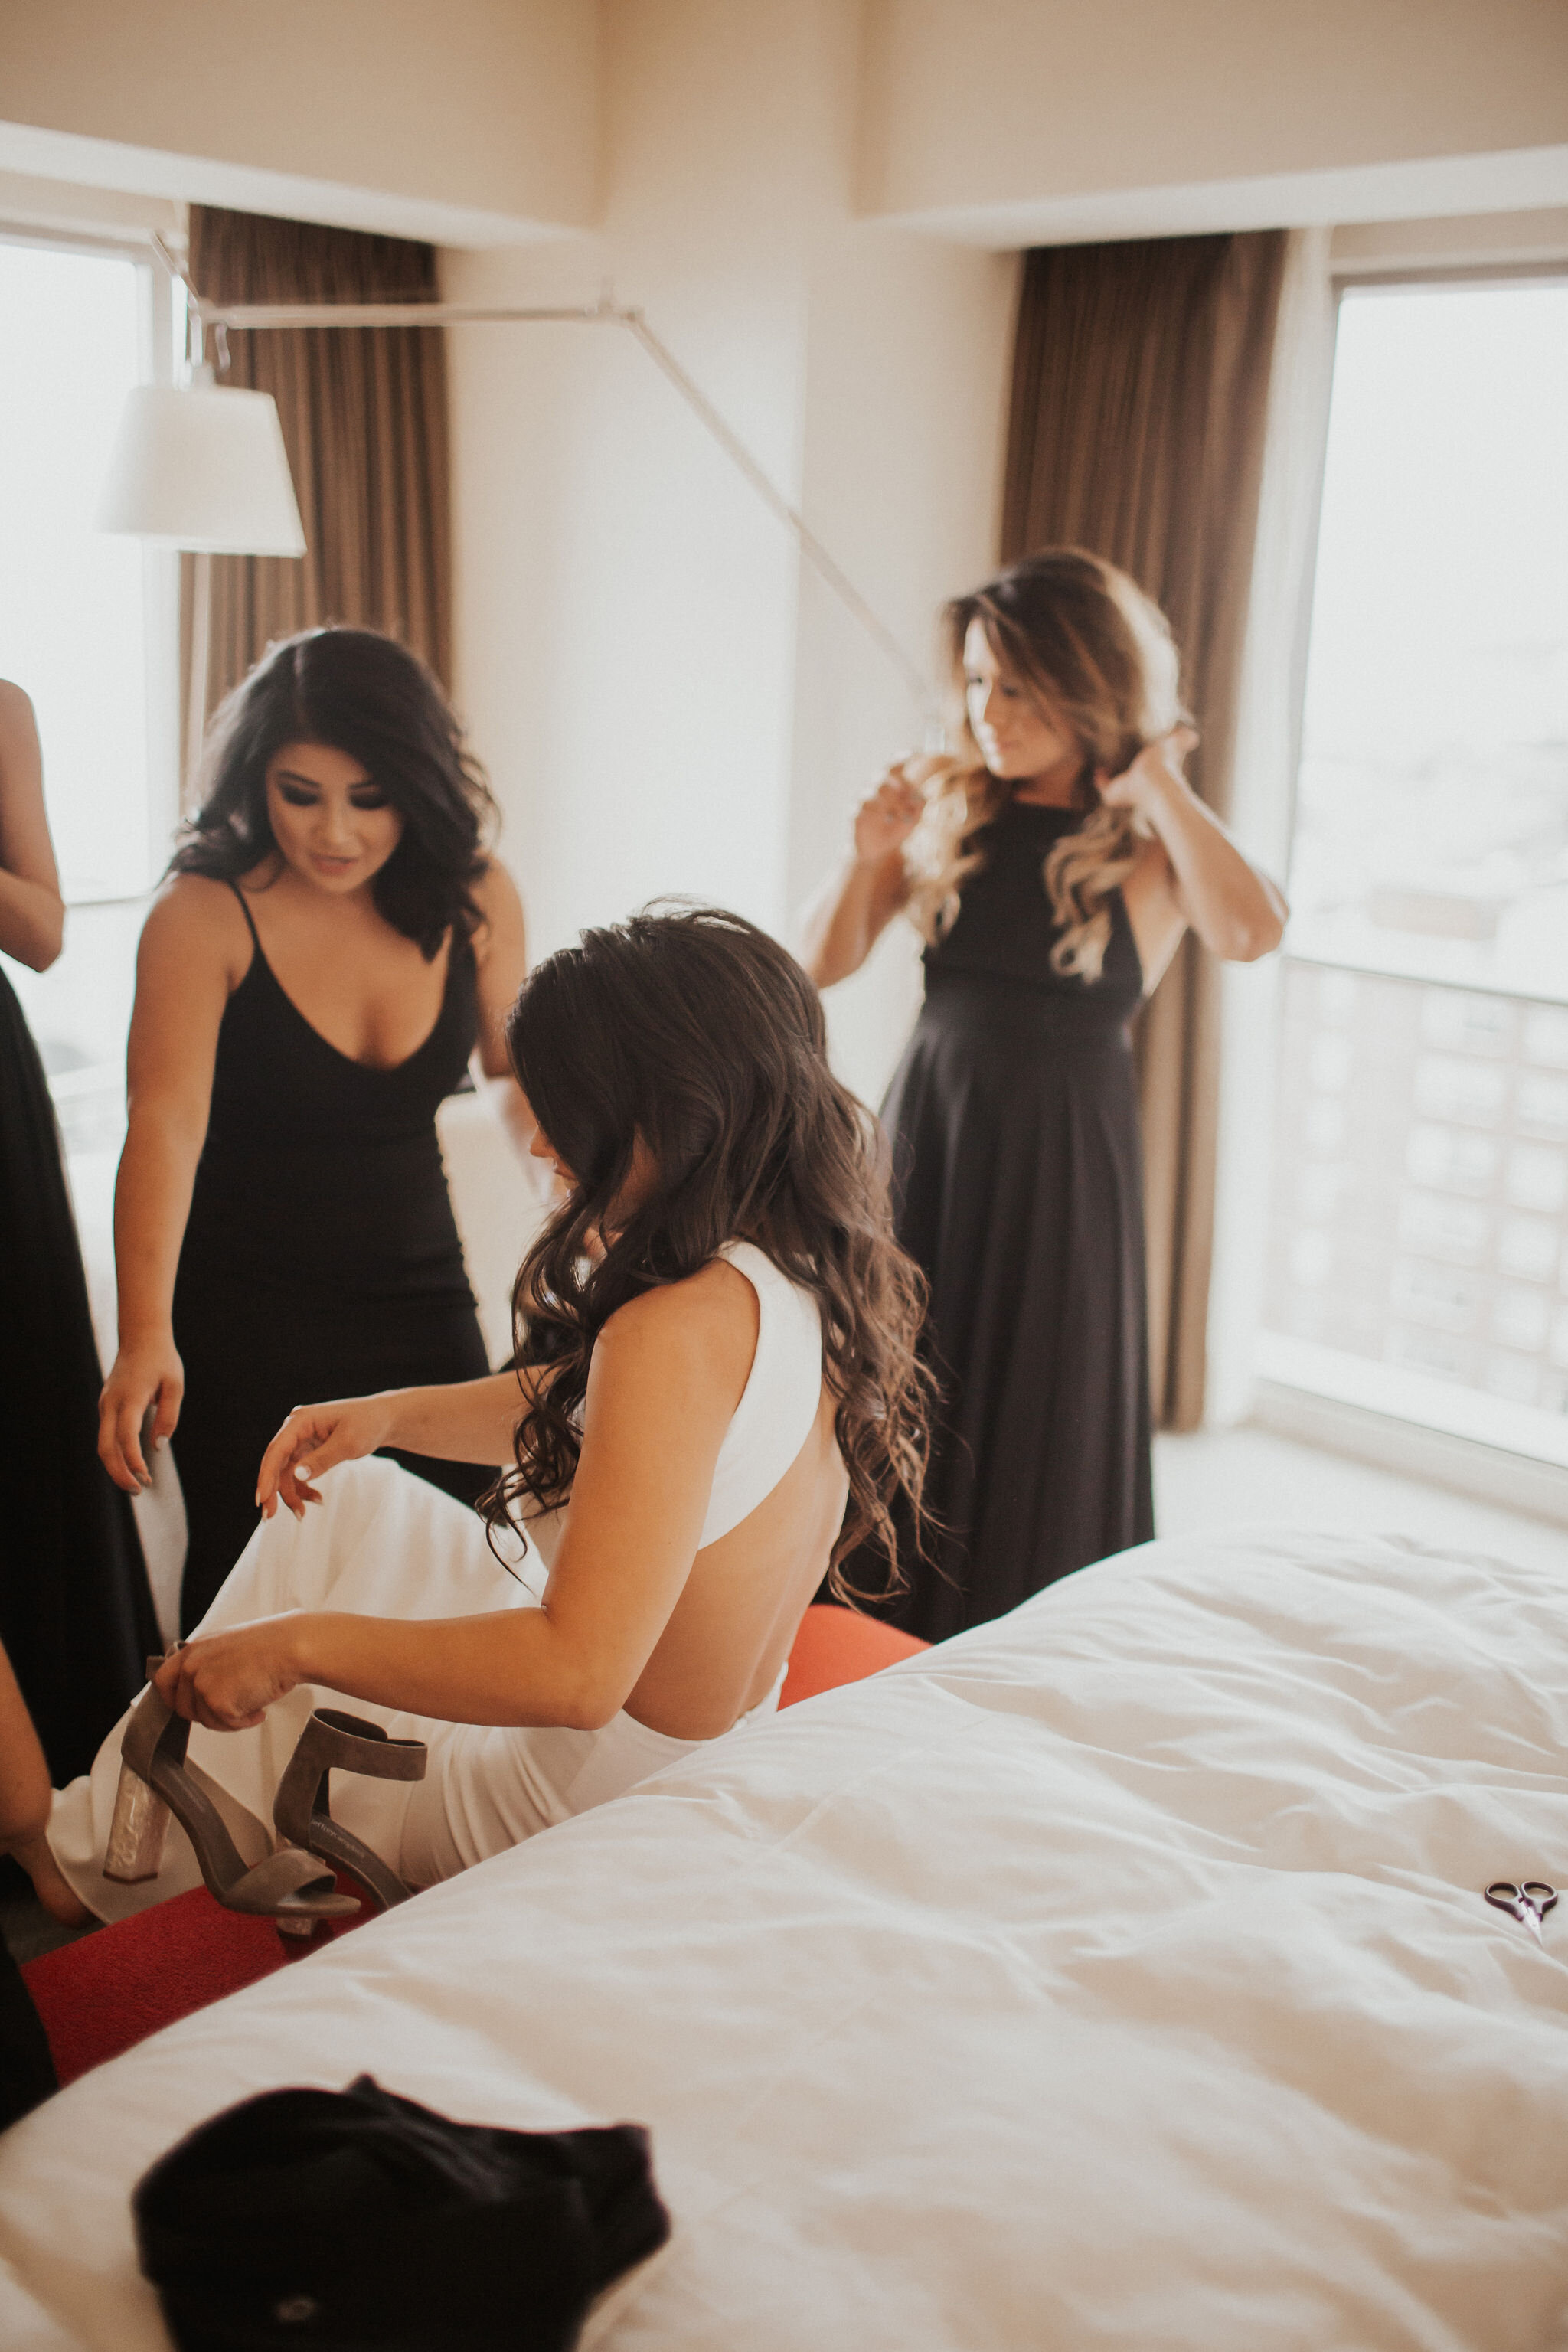 Sykes-getting-ready-august-muse-images-seattle-wedding-photographer-within-sodo-four-seasons-133.jpg